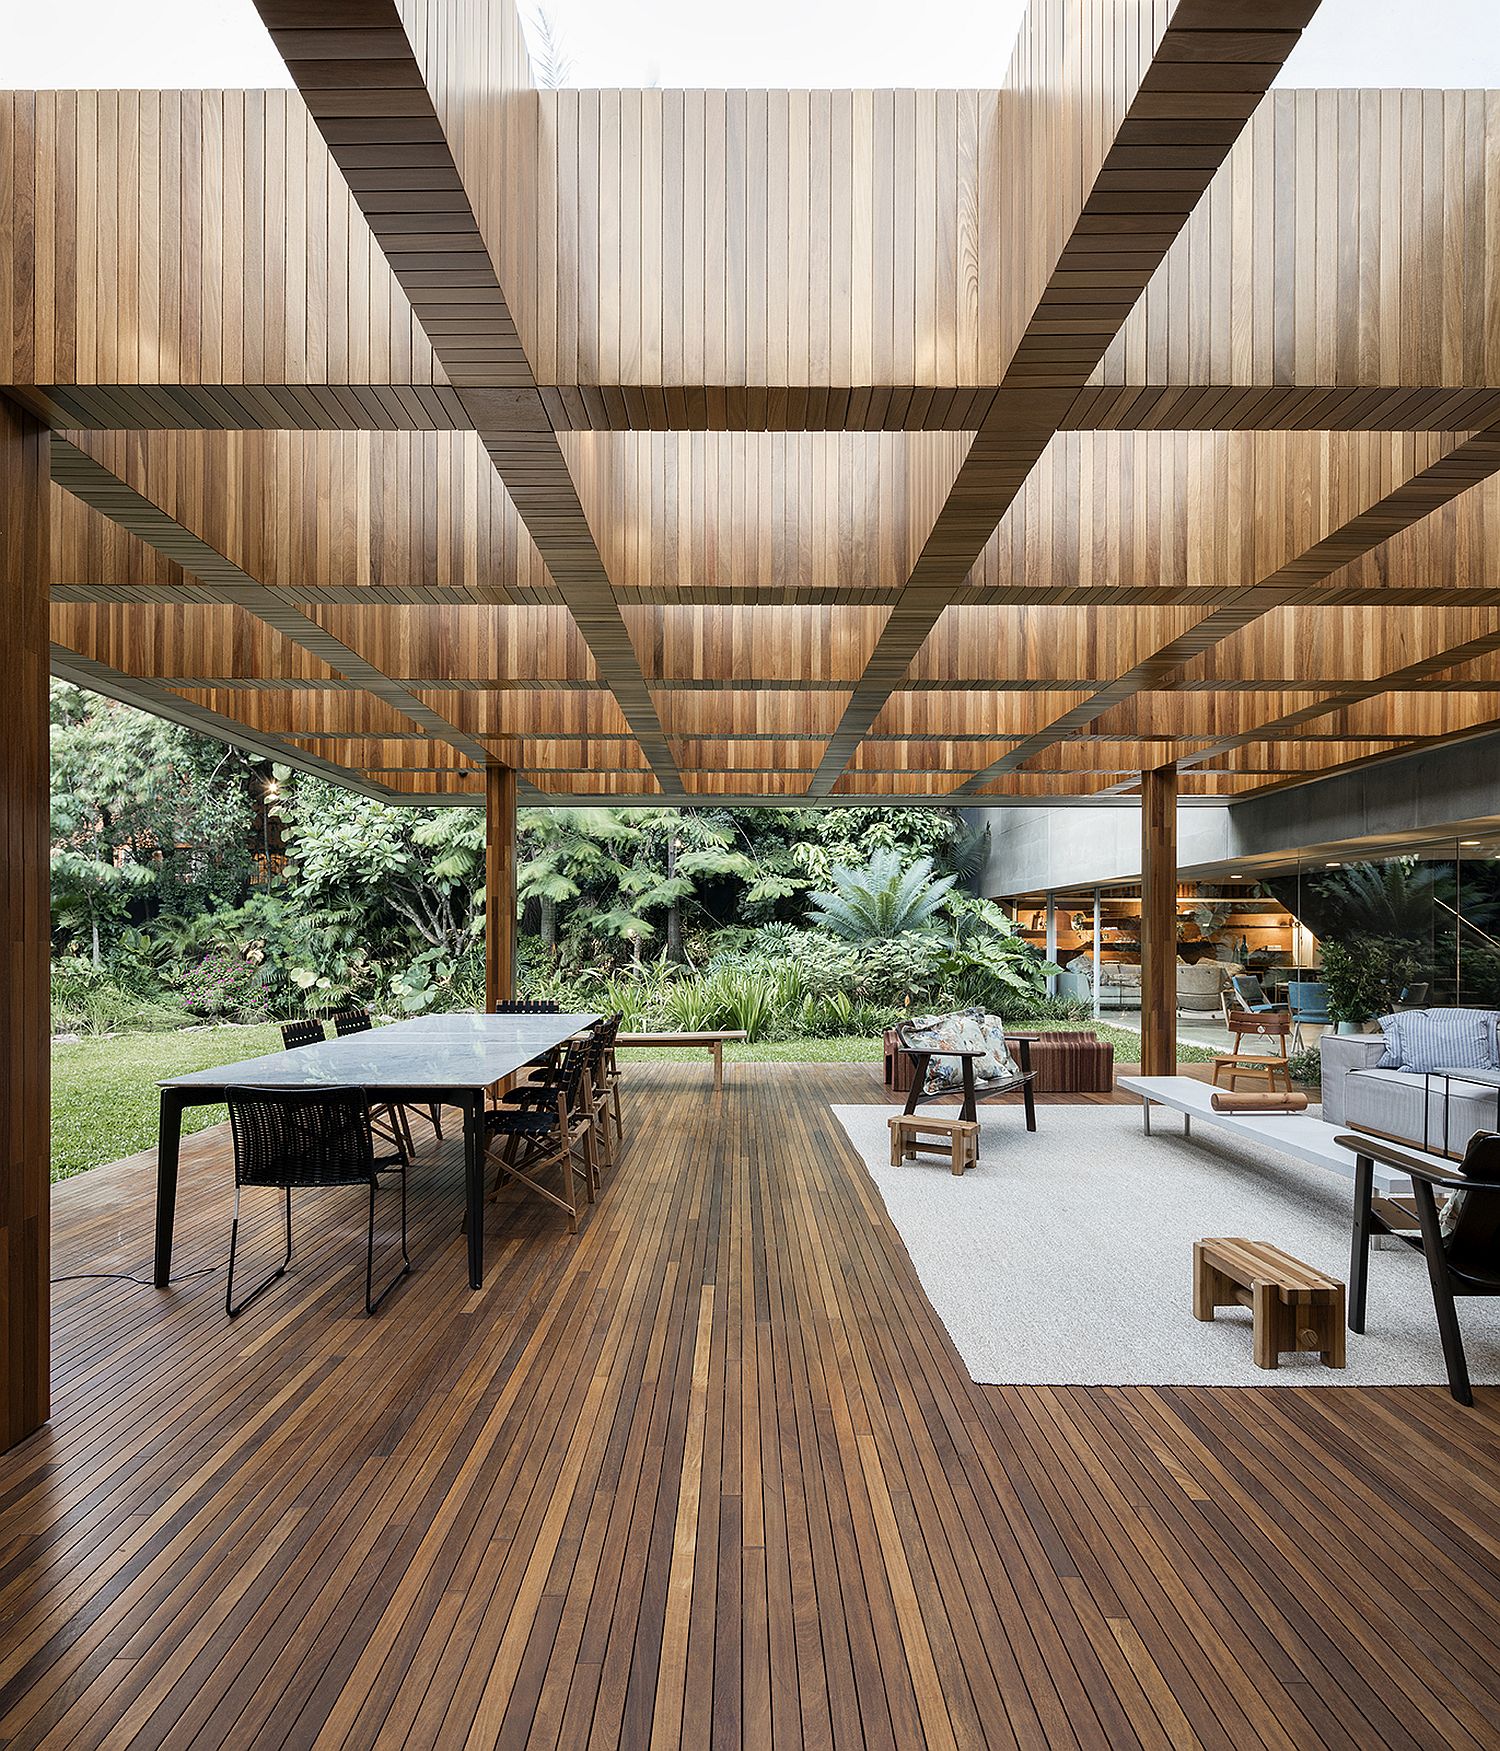 New-Dpot-store-in-Sao-paulo-with-an-open-and-inviting-setting